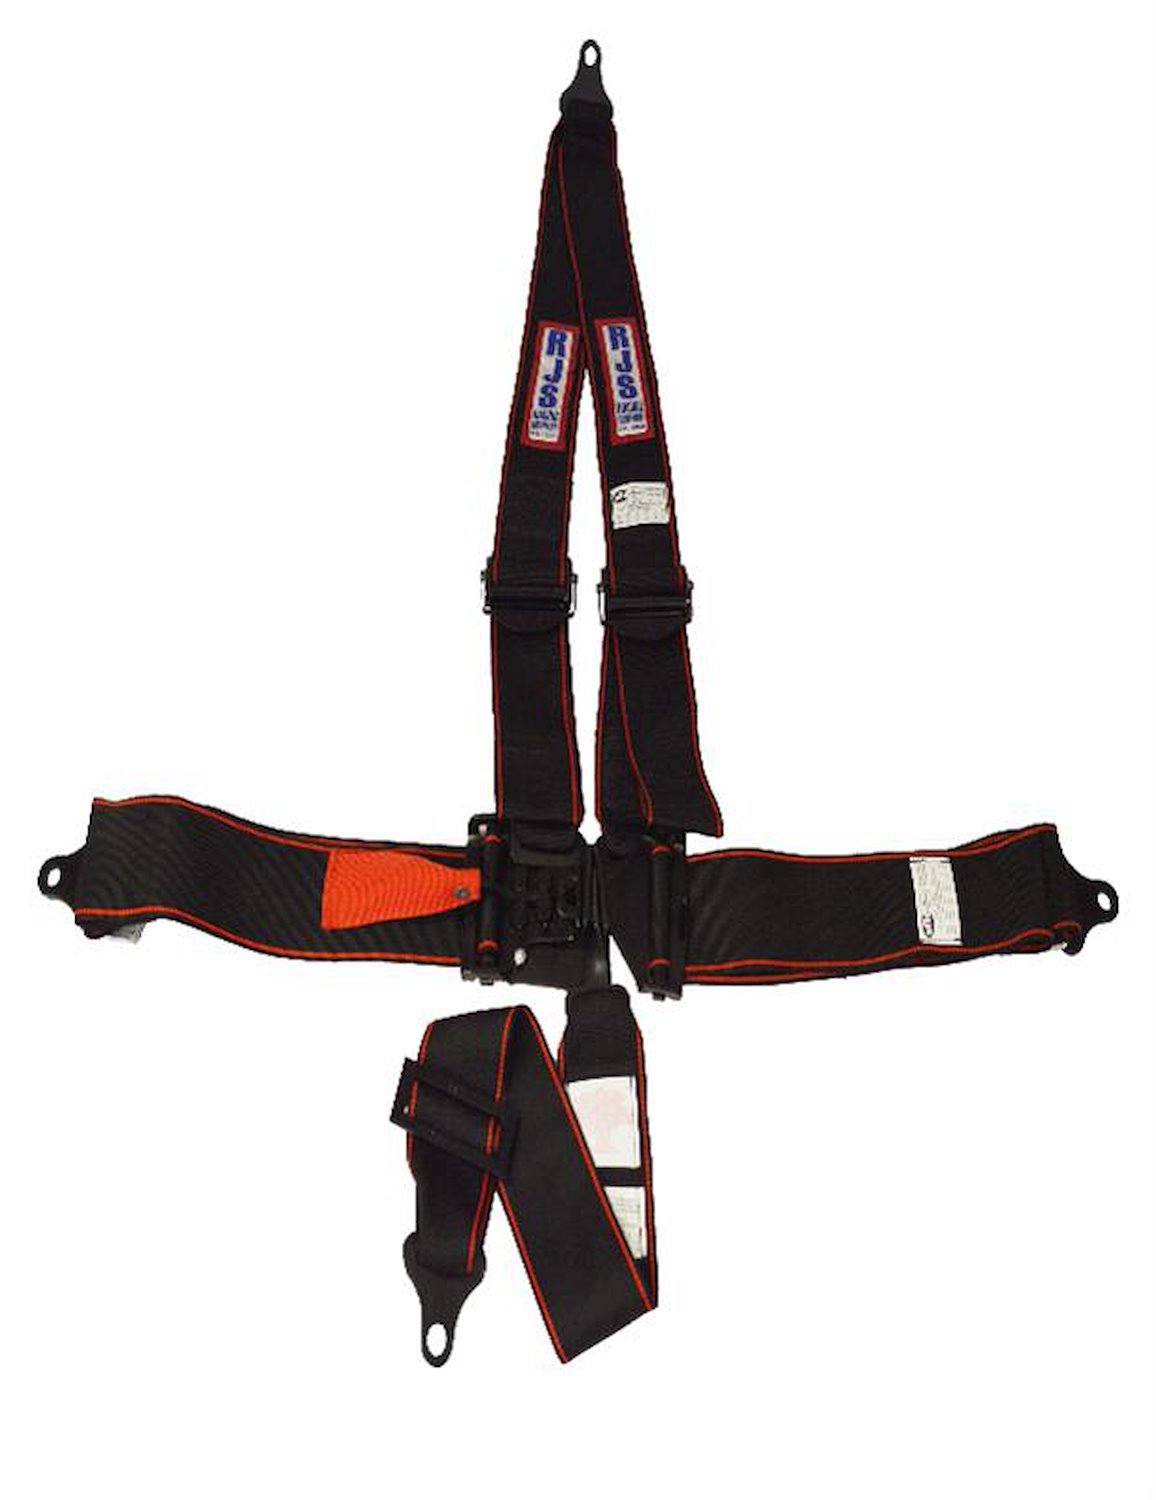 SFI 16.1 ELITE L&L HARNESS 3 PULL DOWN Lap Belt 3 Shoulder Harness Individual FLOOR Mount 3 DOUBLE Sub ALL WRAP ENDS BLACK/RED